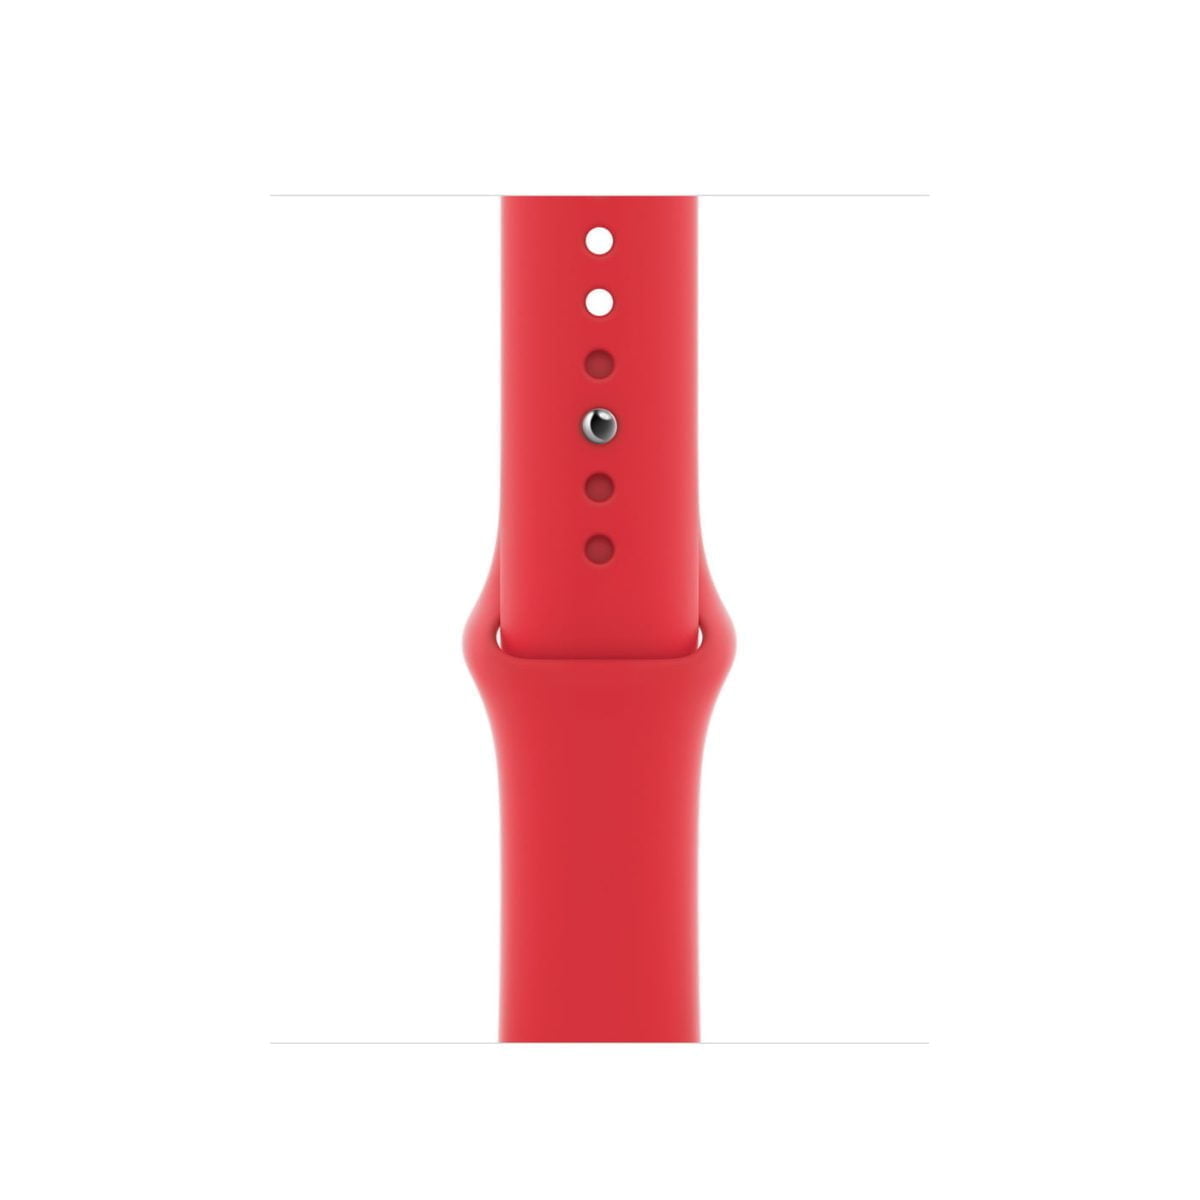 Myar2 Apple &Lt;Div Class=&Quot;Sku-Title&Quot;&Gt; &Lt;Div Class=&Quot;Sku-Title&Quot;&Gt; &Lt;H1 Class=&Quot;Heading-5 V-Fw-Regular&Quot;&Gt;Apple Watch Series 6 (Gps) 40Mm Red Aluminum Case With Red Sport Band - (Product)Red&Lt;/H1&Gt; &Lt;/Div&Gt; &Lt;/Div&Gt; &Lt;Div Class=&Quot;Long-Description-Container Body-Copy &Quot;&Gt; &Lt;Div Class=&Quot;Product-Description&Quot;&Gt; &Lt;Div Class=&Quot;Product-Description&Quot;&Gt;Apple Watch Series 6 Lets You Measure Your Blood Oxygen Level With A Revolutionary New Sensor And App.¹ Take An Ecg From Your Wrist.² See Your Fitness Metrics On The Enhanced Always-On Retina Display, Now 2.5X Brighter Outdoors When Your Wrist Is Down. Set A Bedtime Routine And Track Your Sleep. And Reply To Calls And Messages Right From Your Wrist. It’s The Ultimate Device For A Healthier, More Active, More Connected Life.&Lt;/Div&Gt; &Lt;Div&Gt; &Lt;Div Class=&Quot;As-Productdecision-Productdescriptions&Quot;&Gt; The Aluminum Case Is Lightweight And Made From 100 Percent Recycled Aerospace-Grade Alloy. The Sport Band Is Made From A Durable Yet Surprisingly Soft High-Performance Fluoroelastomer, With An Innovative Pin-And-Tuck Closure. &Lt;/Div&Gt; &Lt;/Div&Gt; &Lt;/Div&Gt; &Lt;/Div&Gt; Apple Watch (Product)Red Aluminum Case With Red Sport Band 40Mm With Gps - M00A3